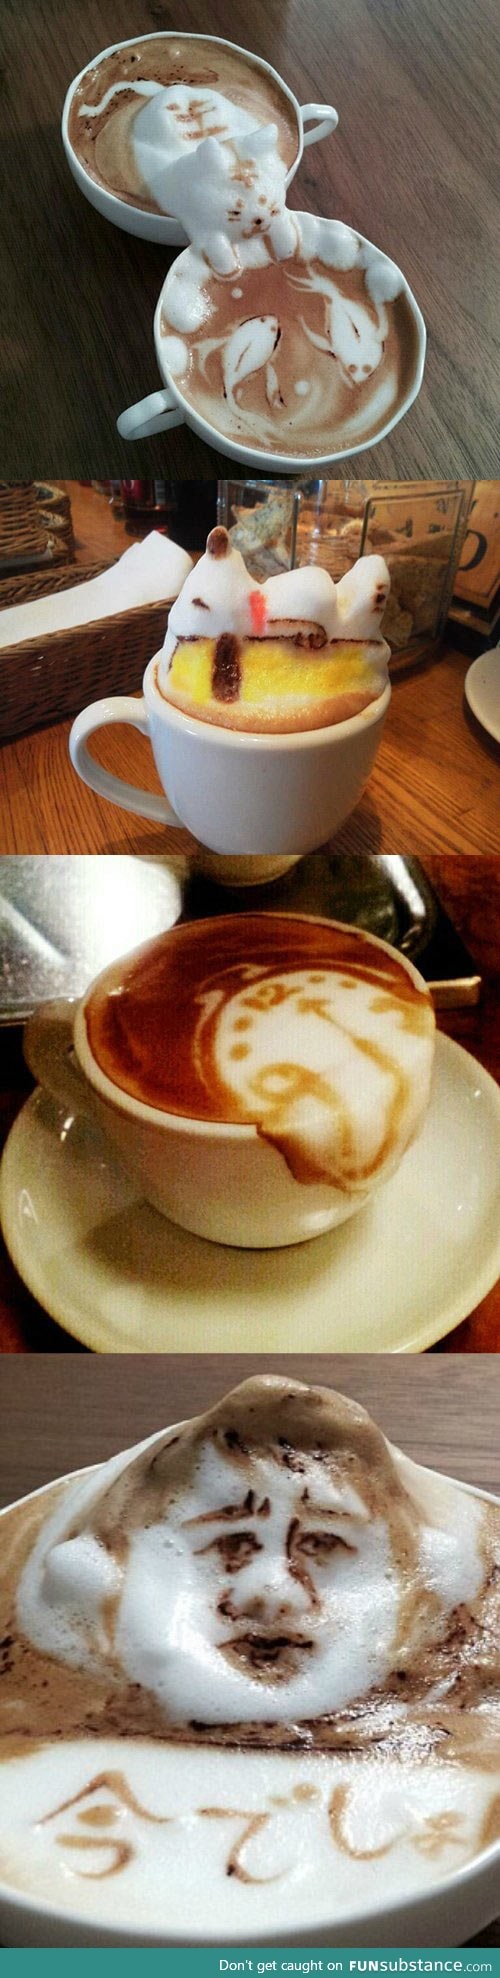 These baristas have real talent